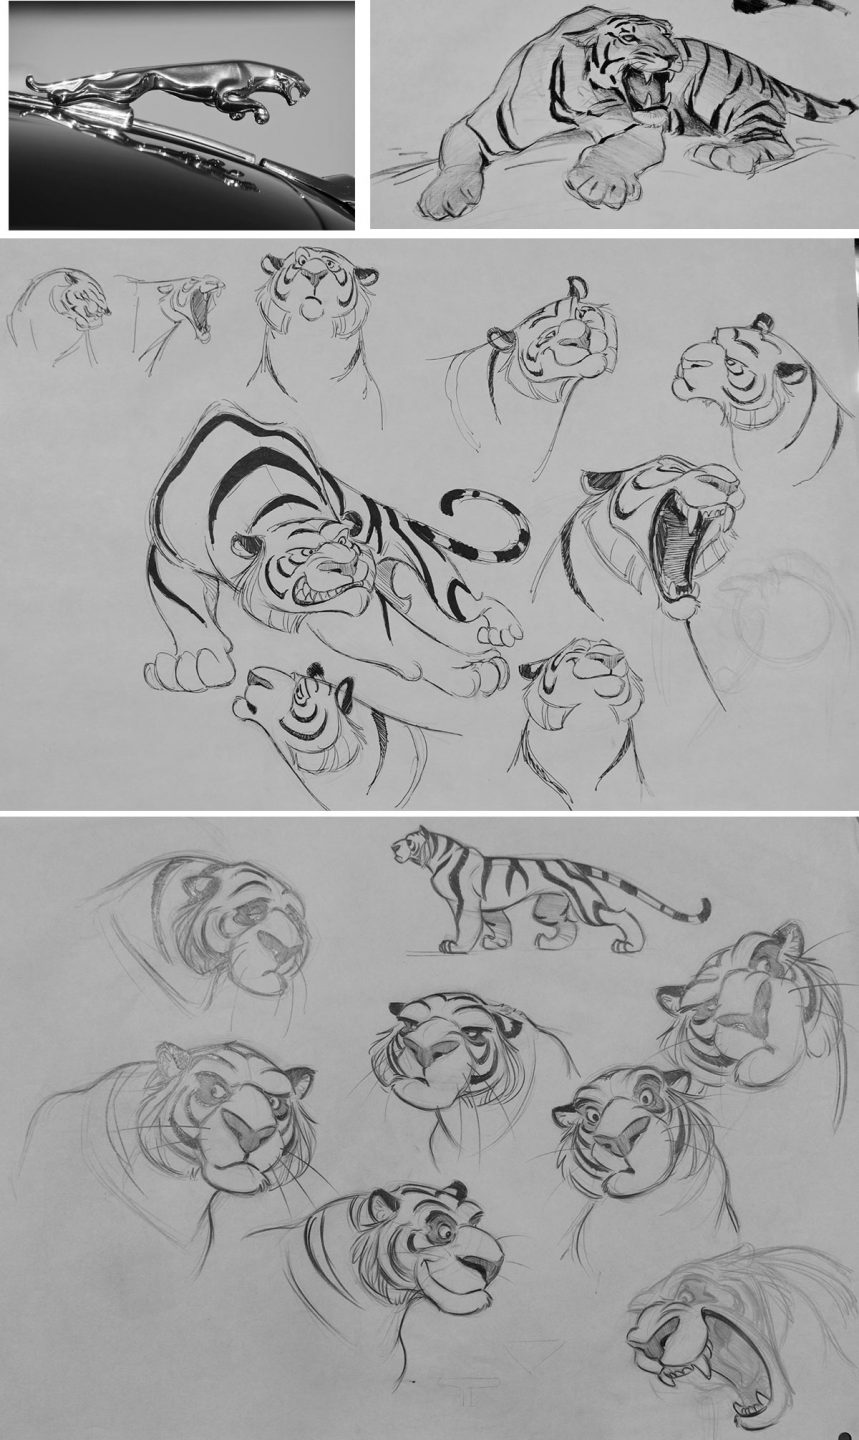 Inspiration and early design approaches to Rajah in "Aladdin."